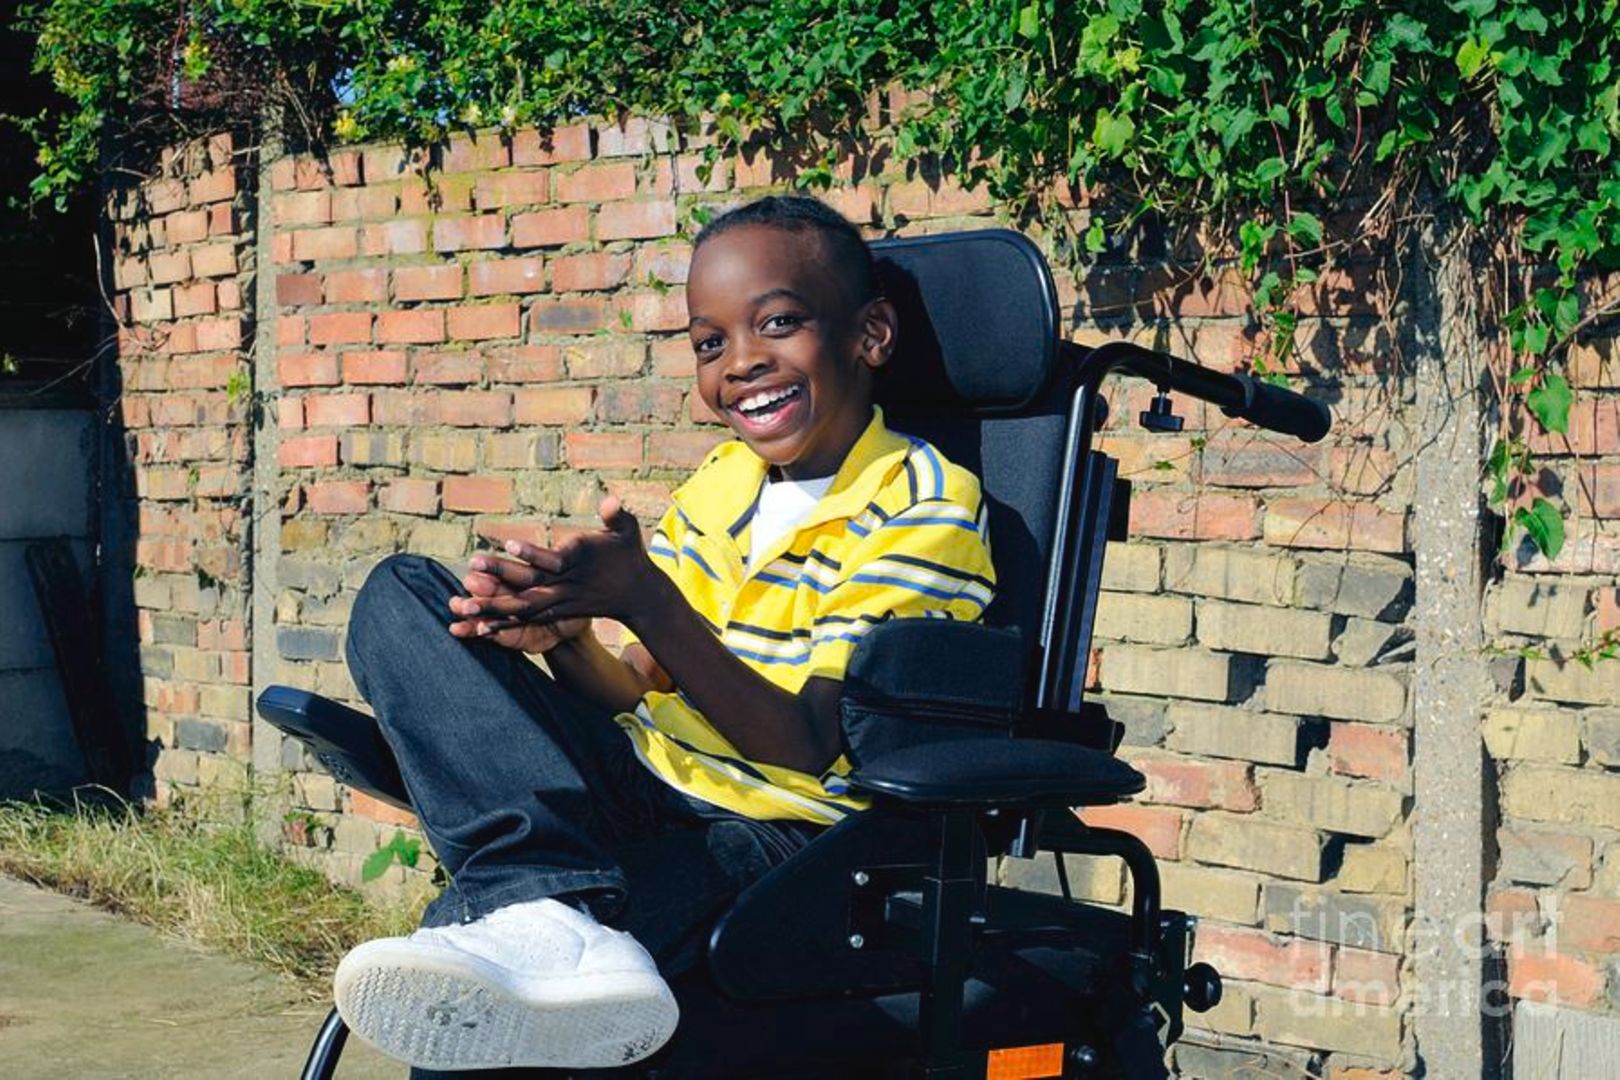 Can a man with cerebral palsy reproduce?